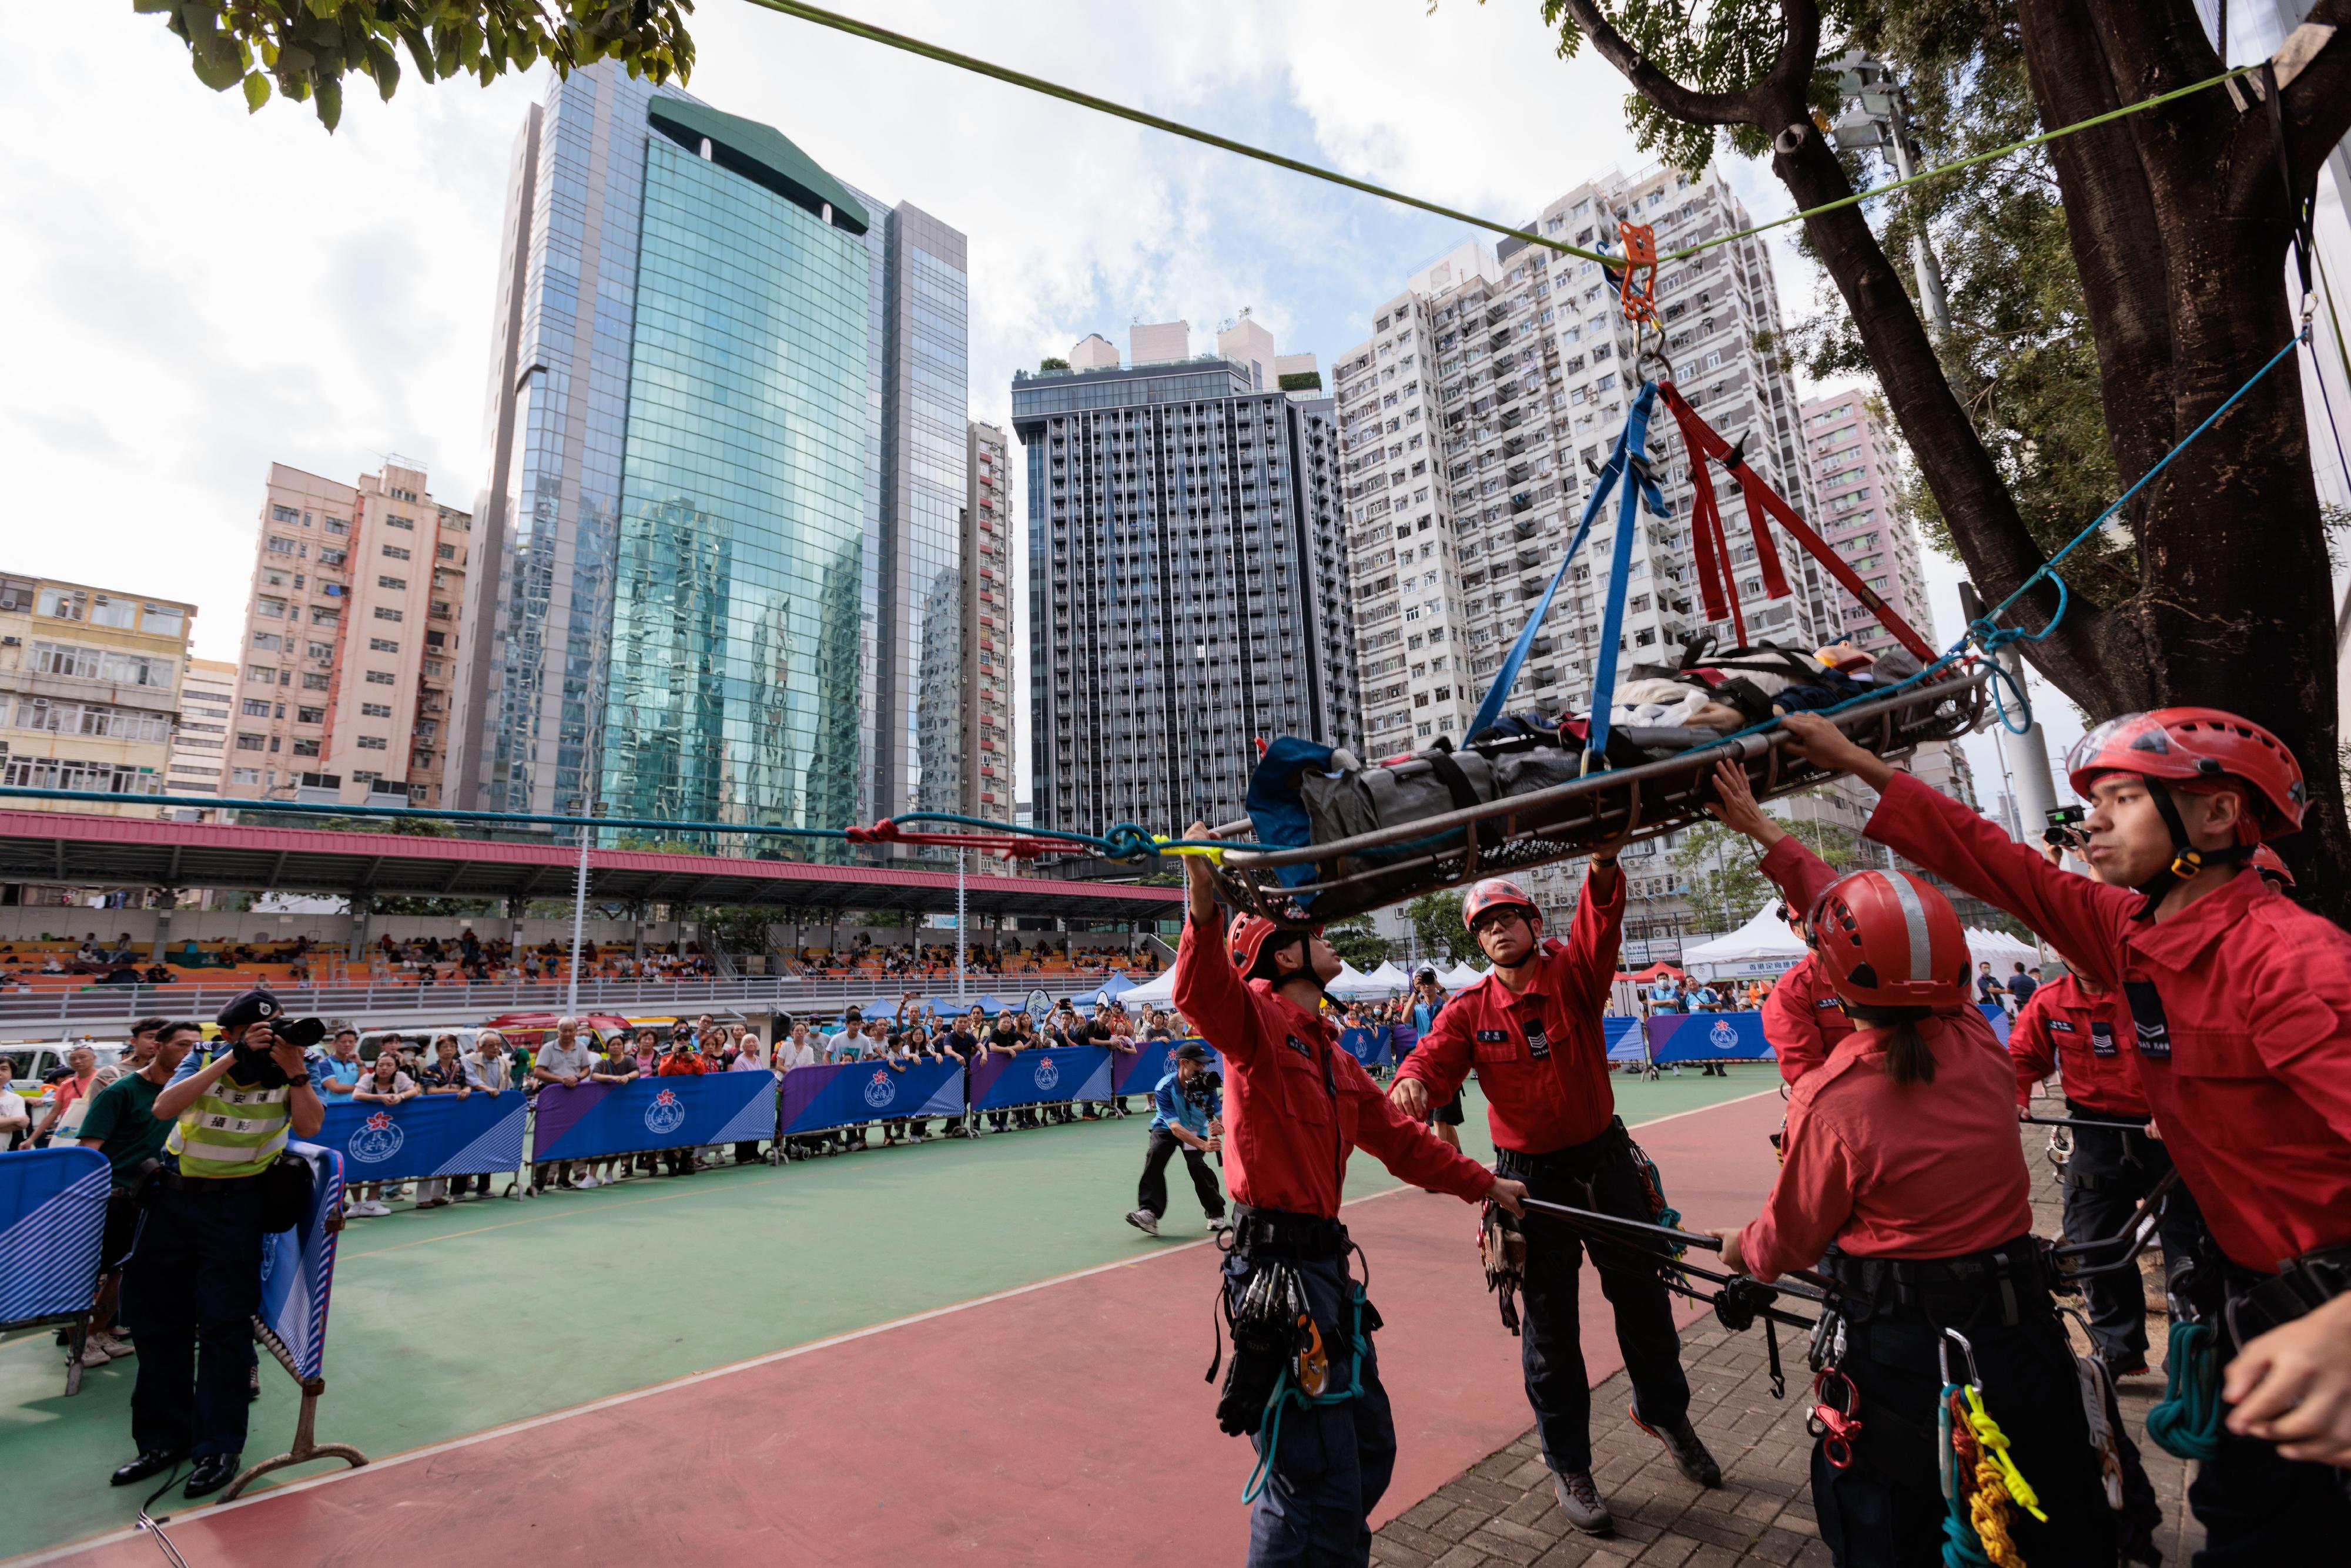 The Civil Aid Service (CAS) held the Mountain Safety Promotion Day with various government departments and mountaineering organisations today (October 22) at MacPherson Playground. Photo shows the CAS members demonstrating mountain rescue techniques.